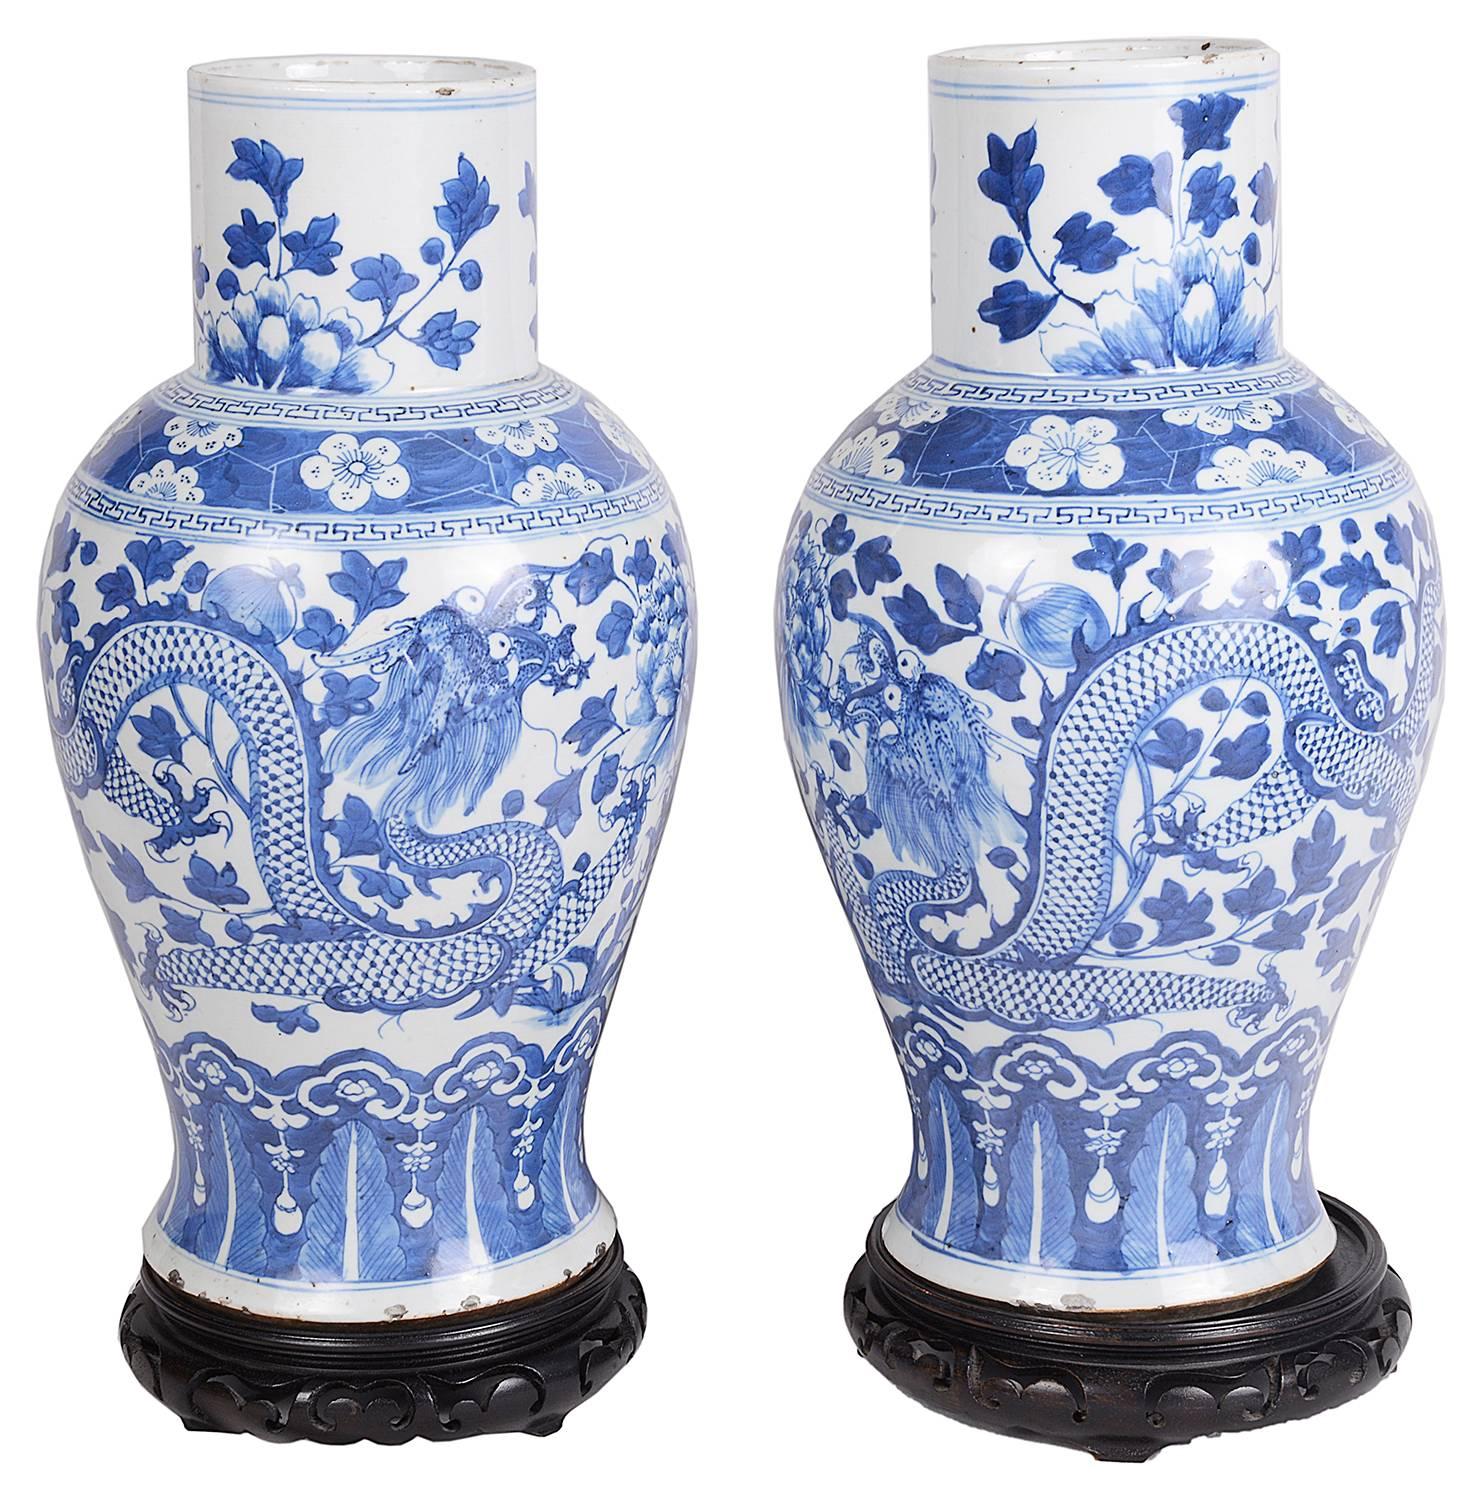 A good quality pair of Chinese 19th Century Blue and White vases. Each depicting mythical dragons amongst leaves and flowers.
We can arrange to have these converted to lamps, if you wish.